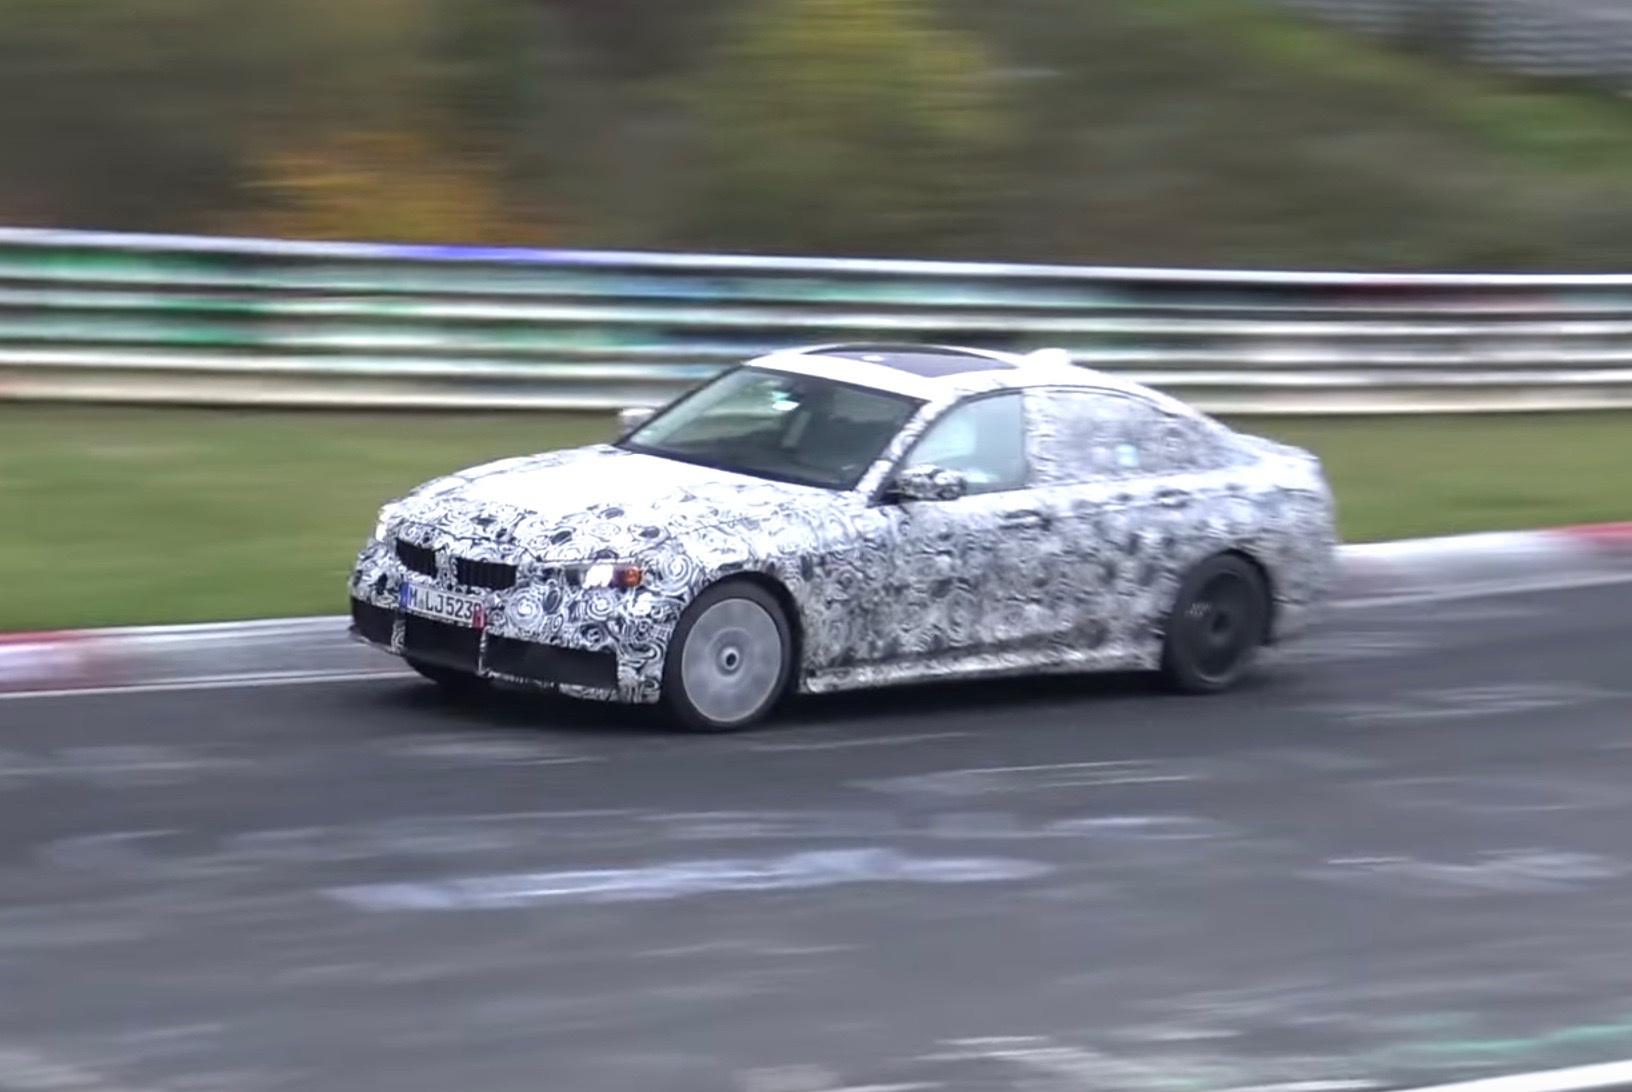 2019 BMW G20 3 Series spotted again, in ‘M340i’ form (video)